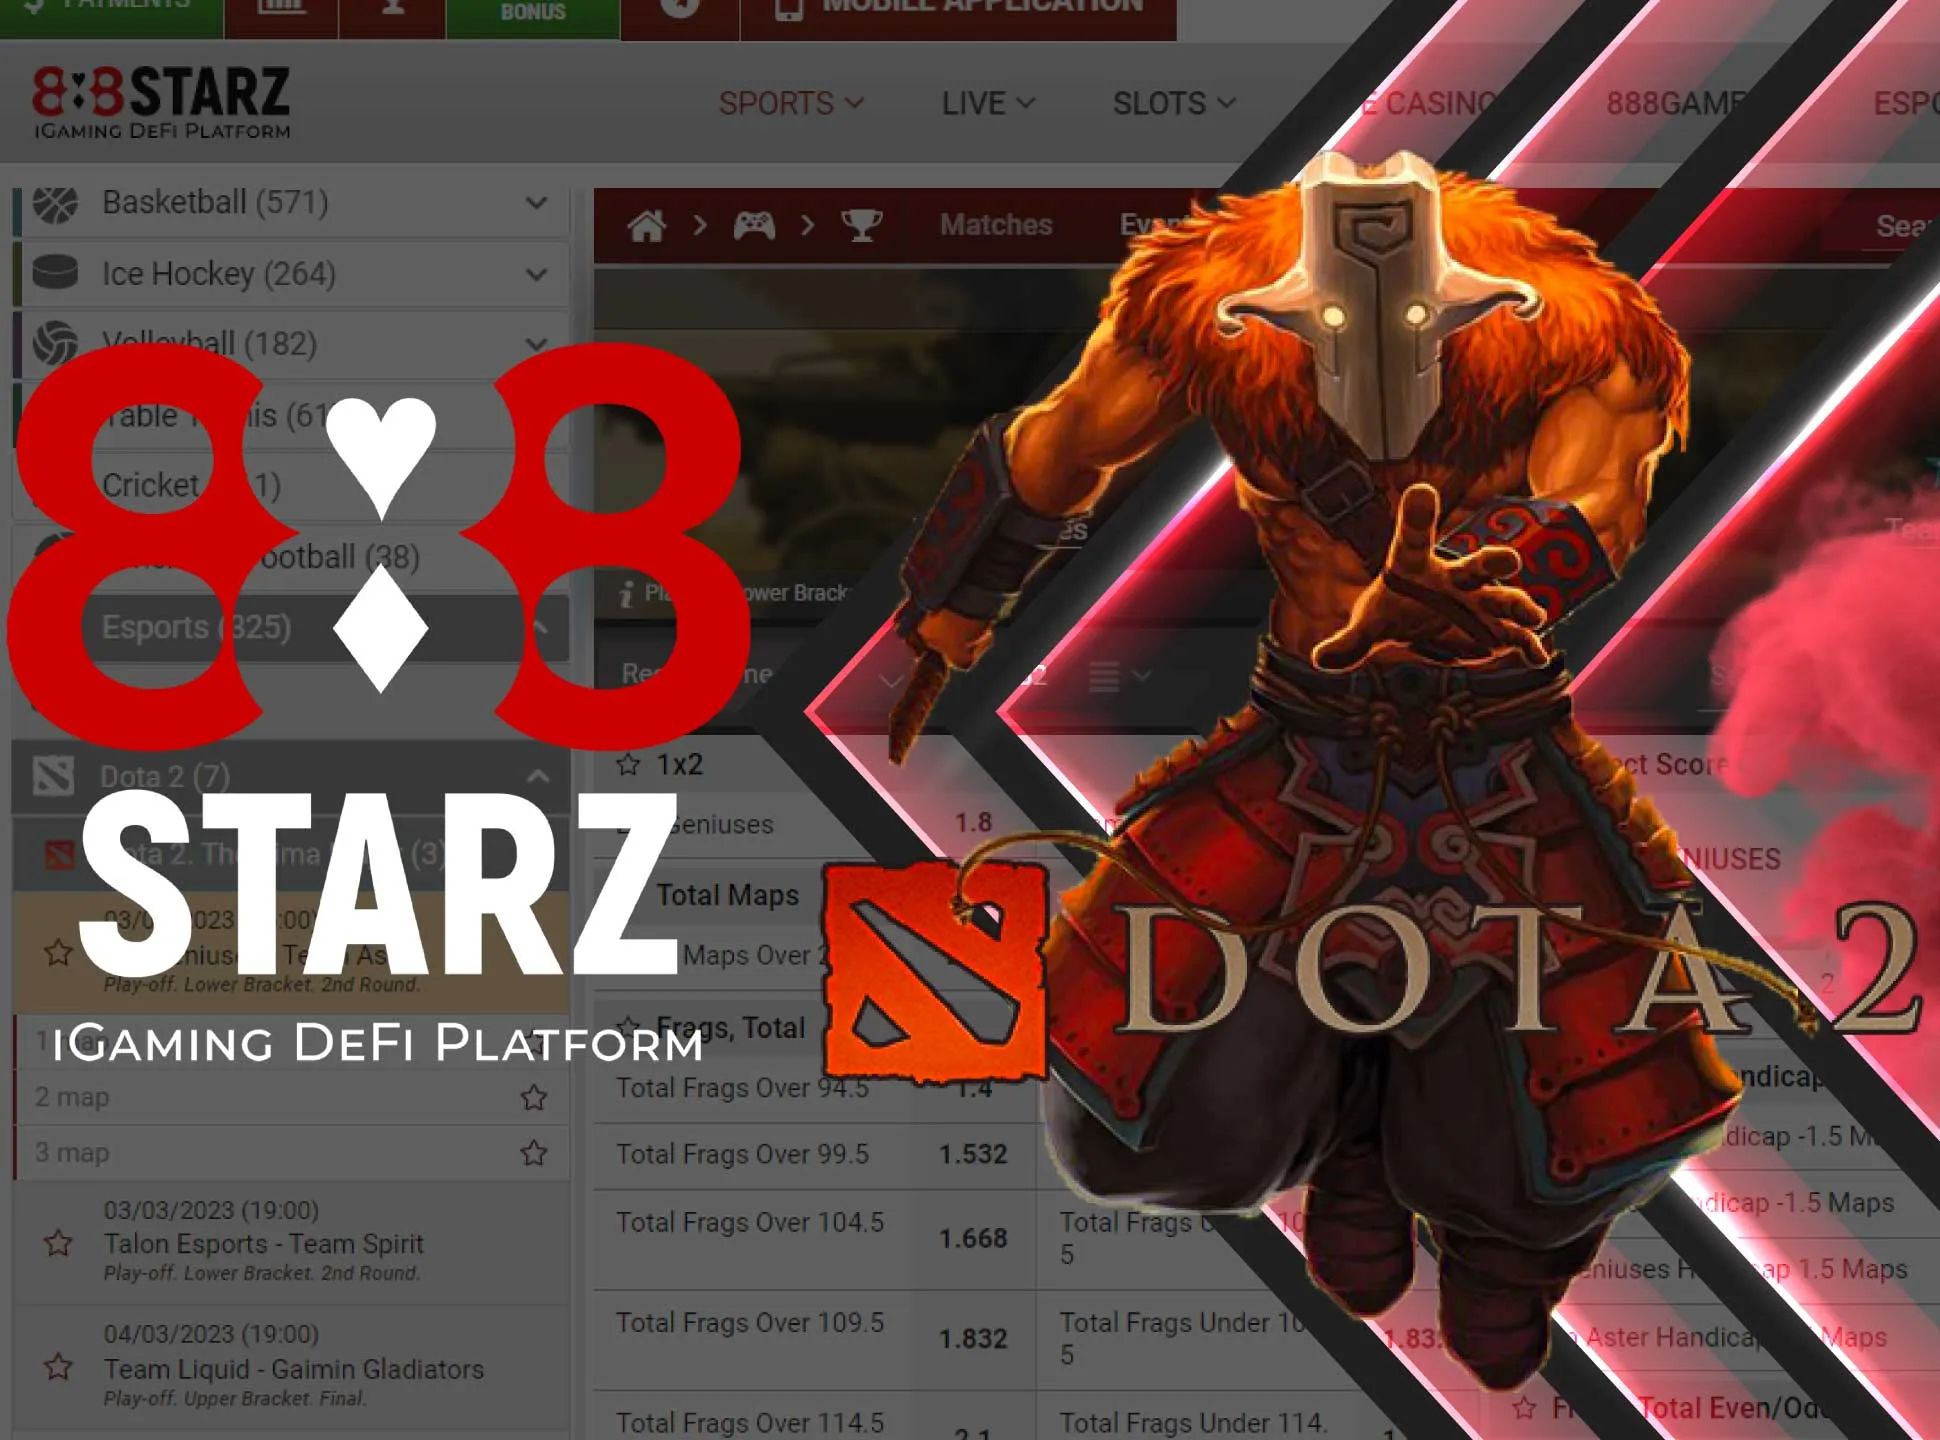 On 888starz you will find a different DOTA 2 competitions to bet on.